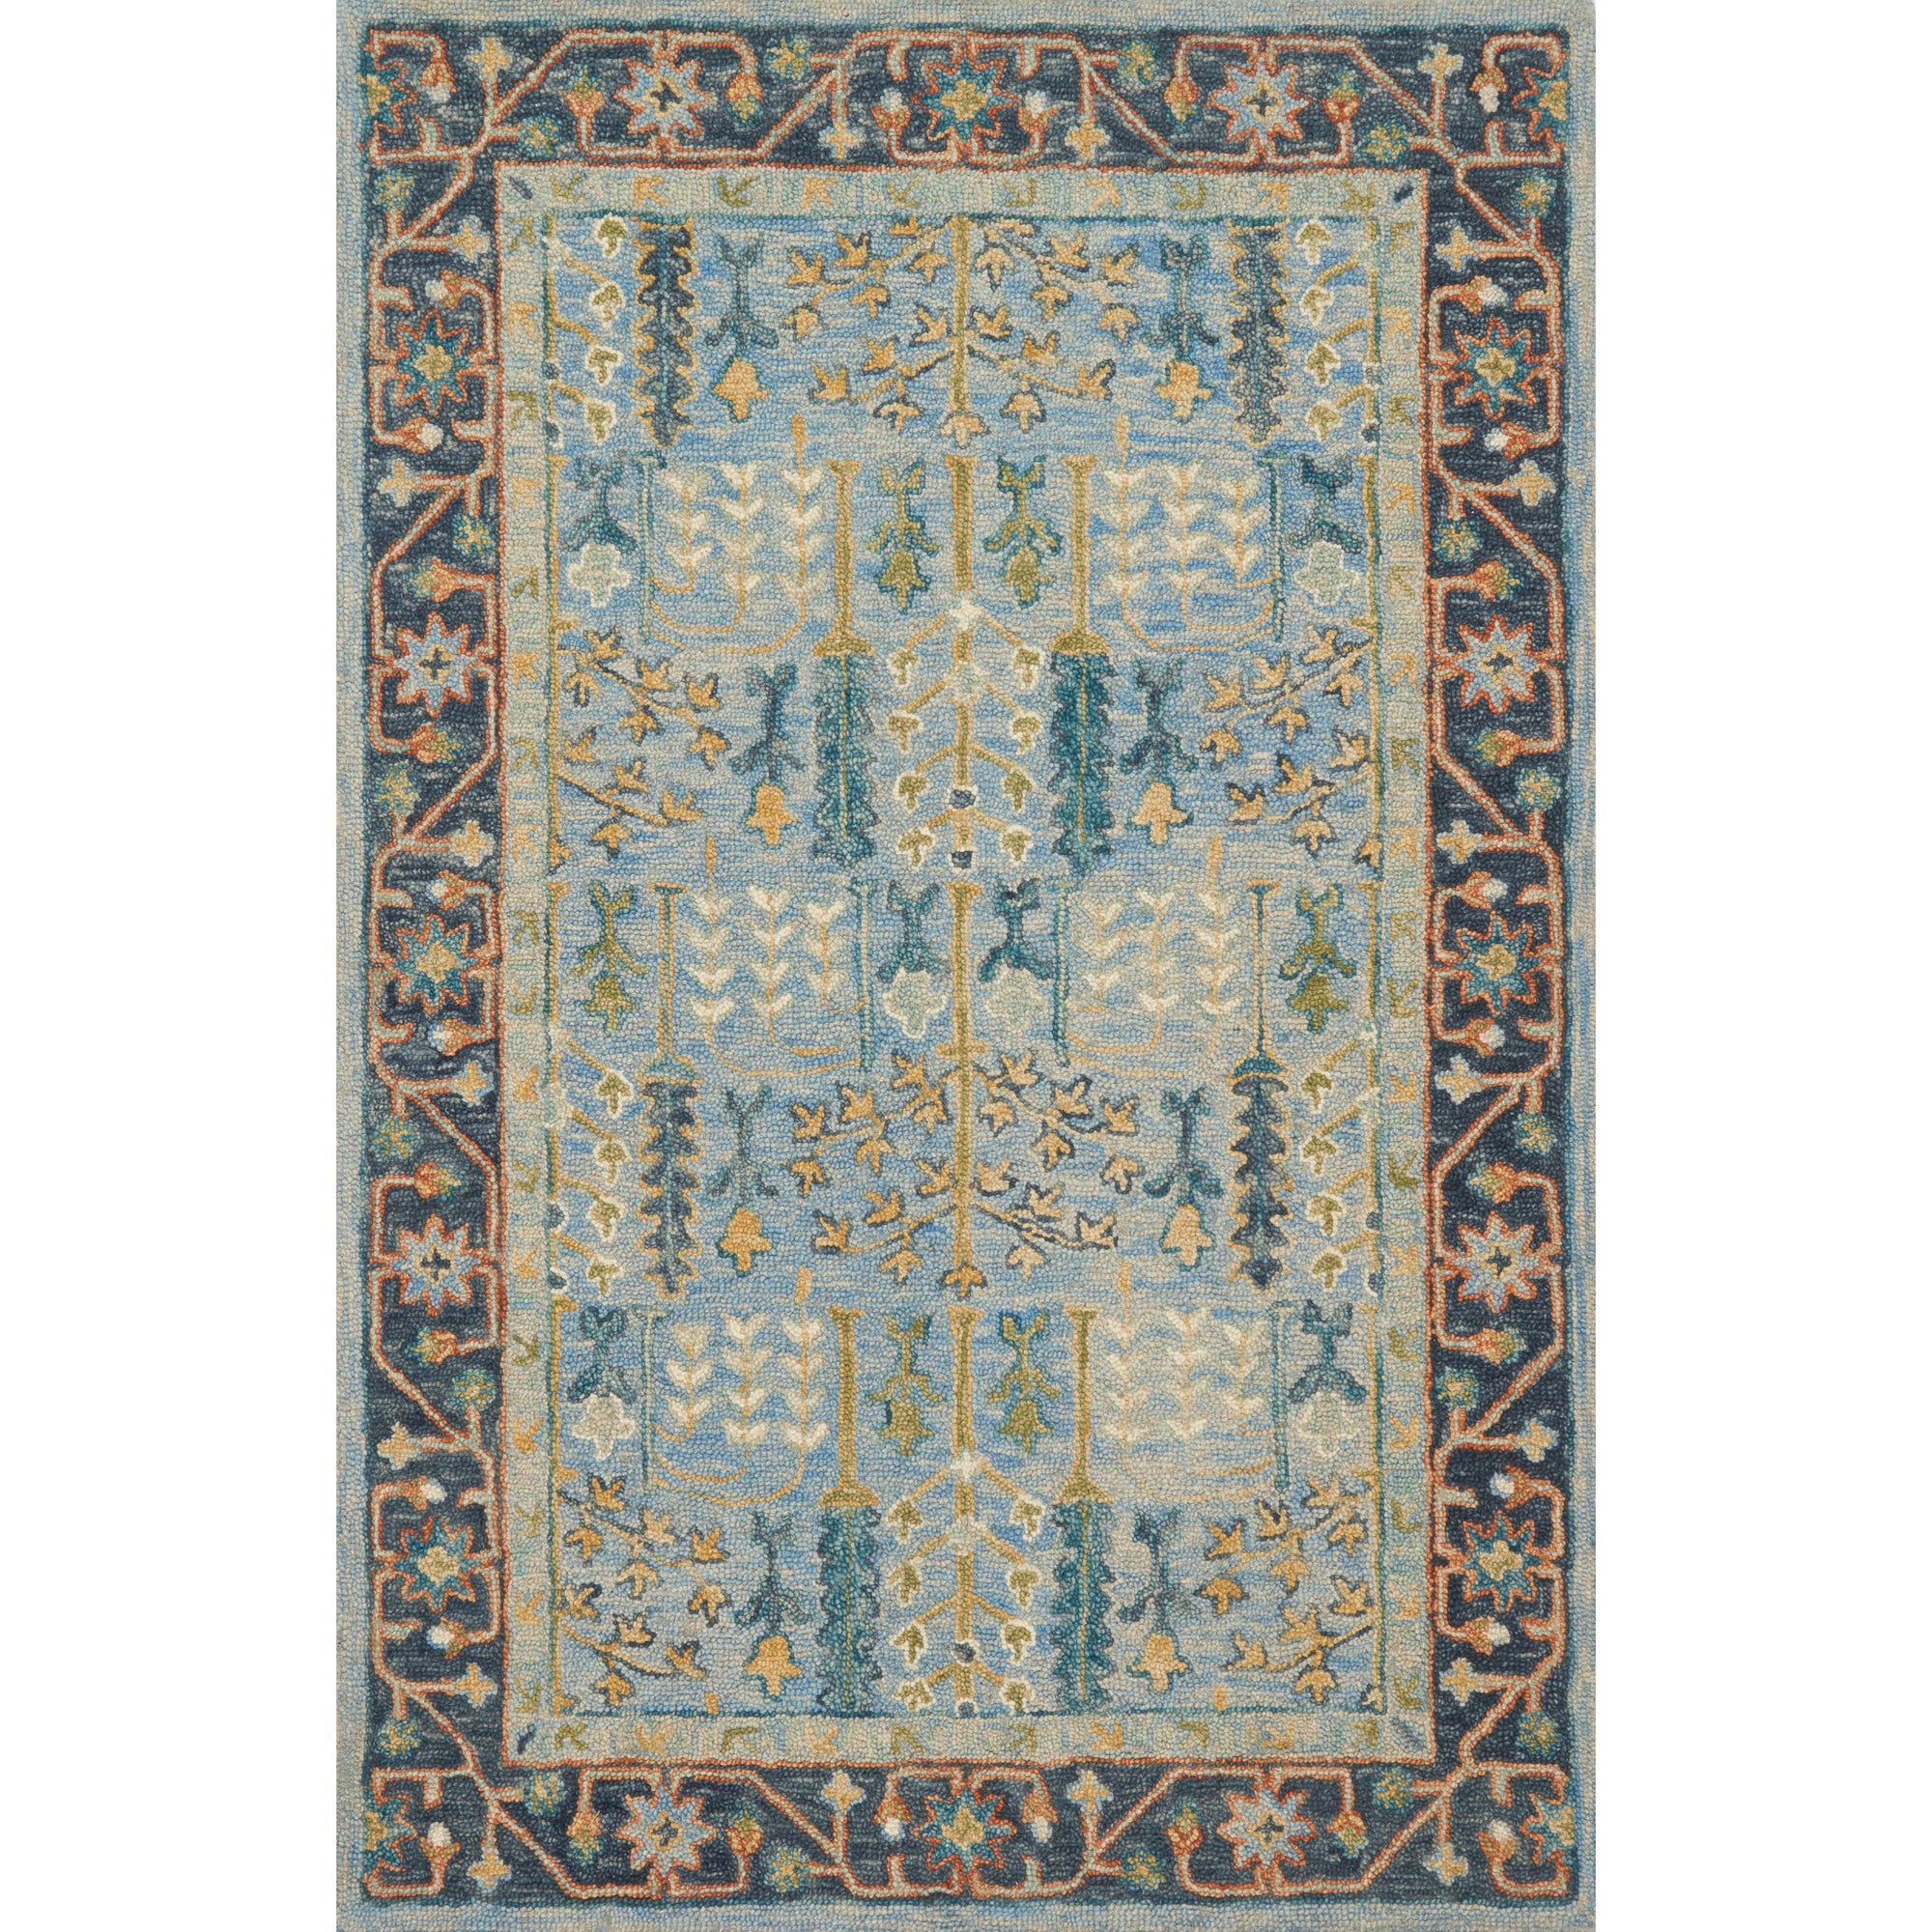 Rugs by Roo Loloi Victoria Lt Blue Dk Blue Area Rug in size 18" x 18" Sample